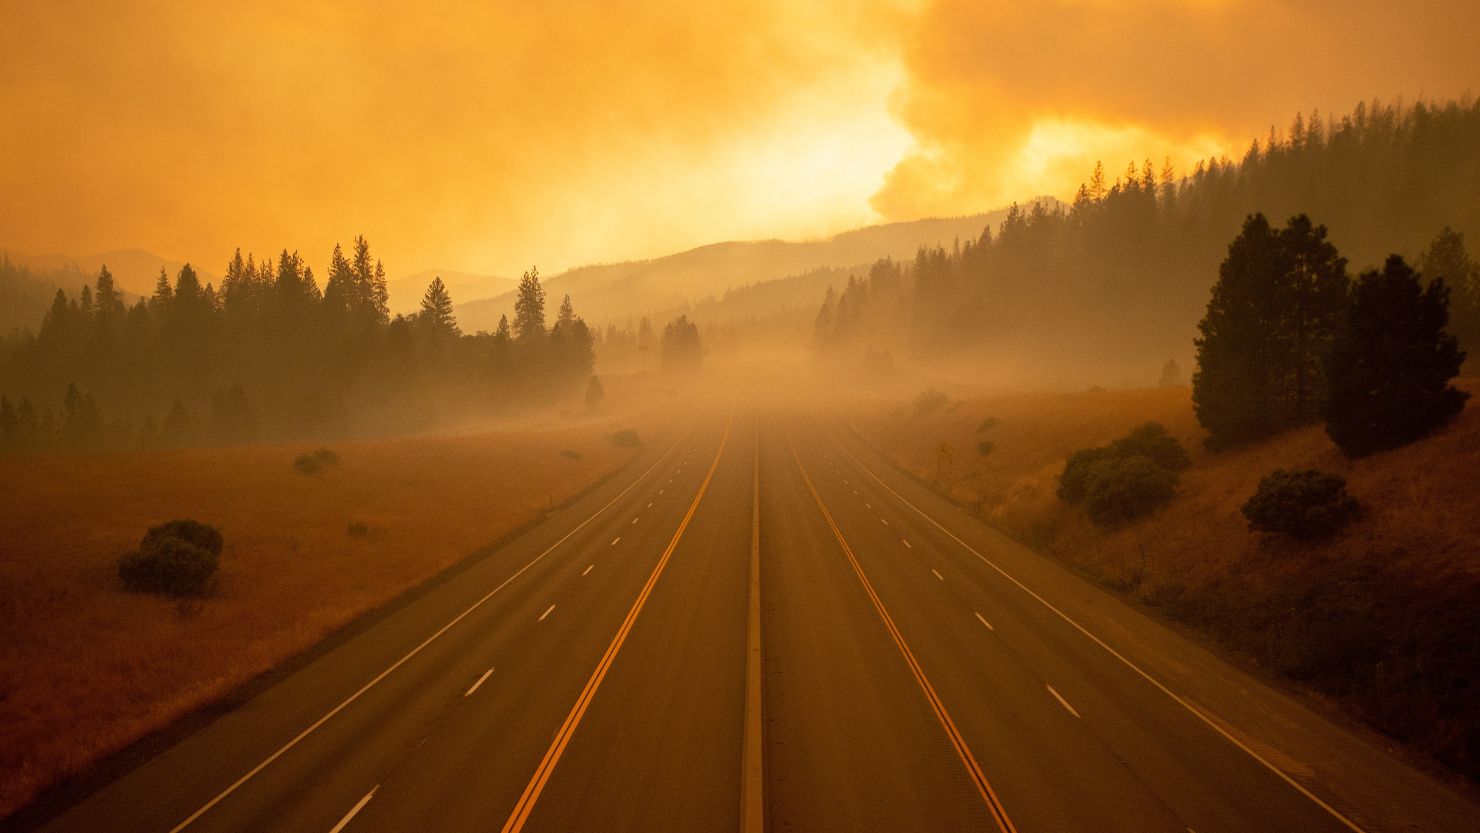 Portions of Interstate 5 in the Shasta Trinity National Forest were closed Thursday due to the wildfire.